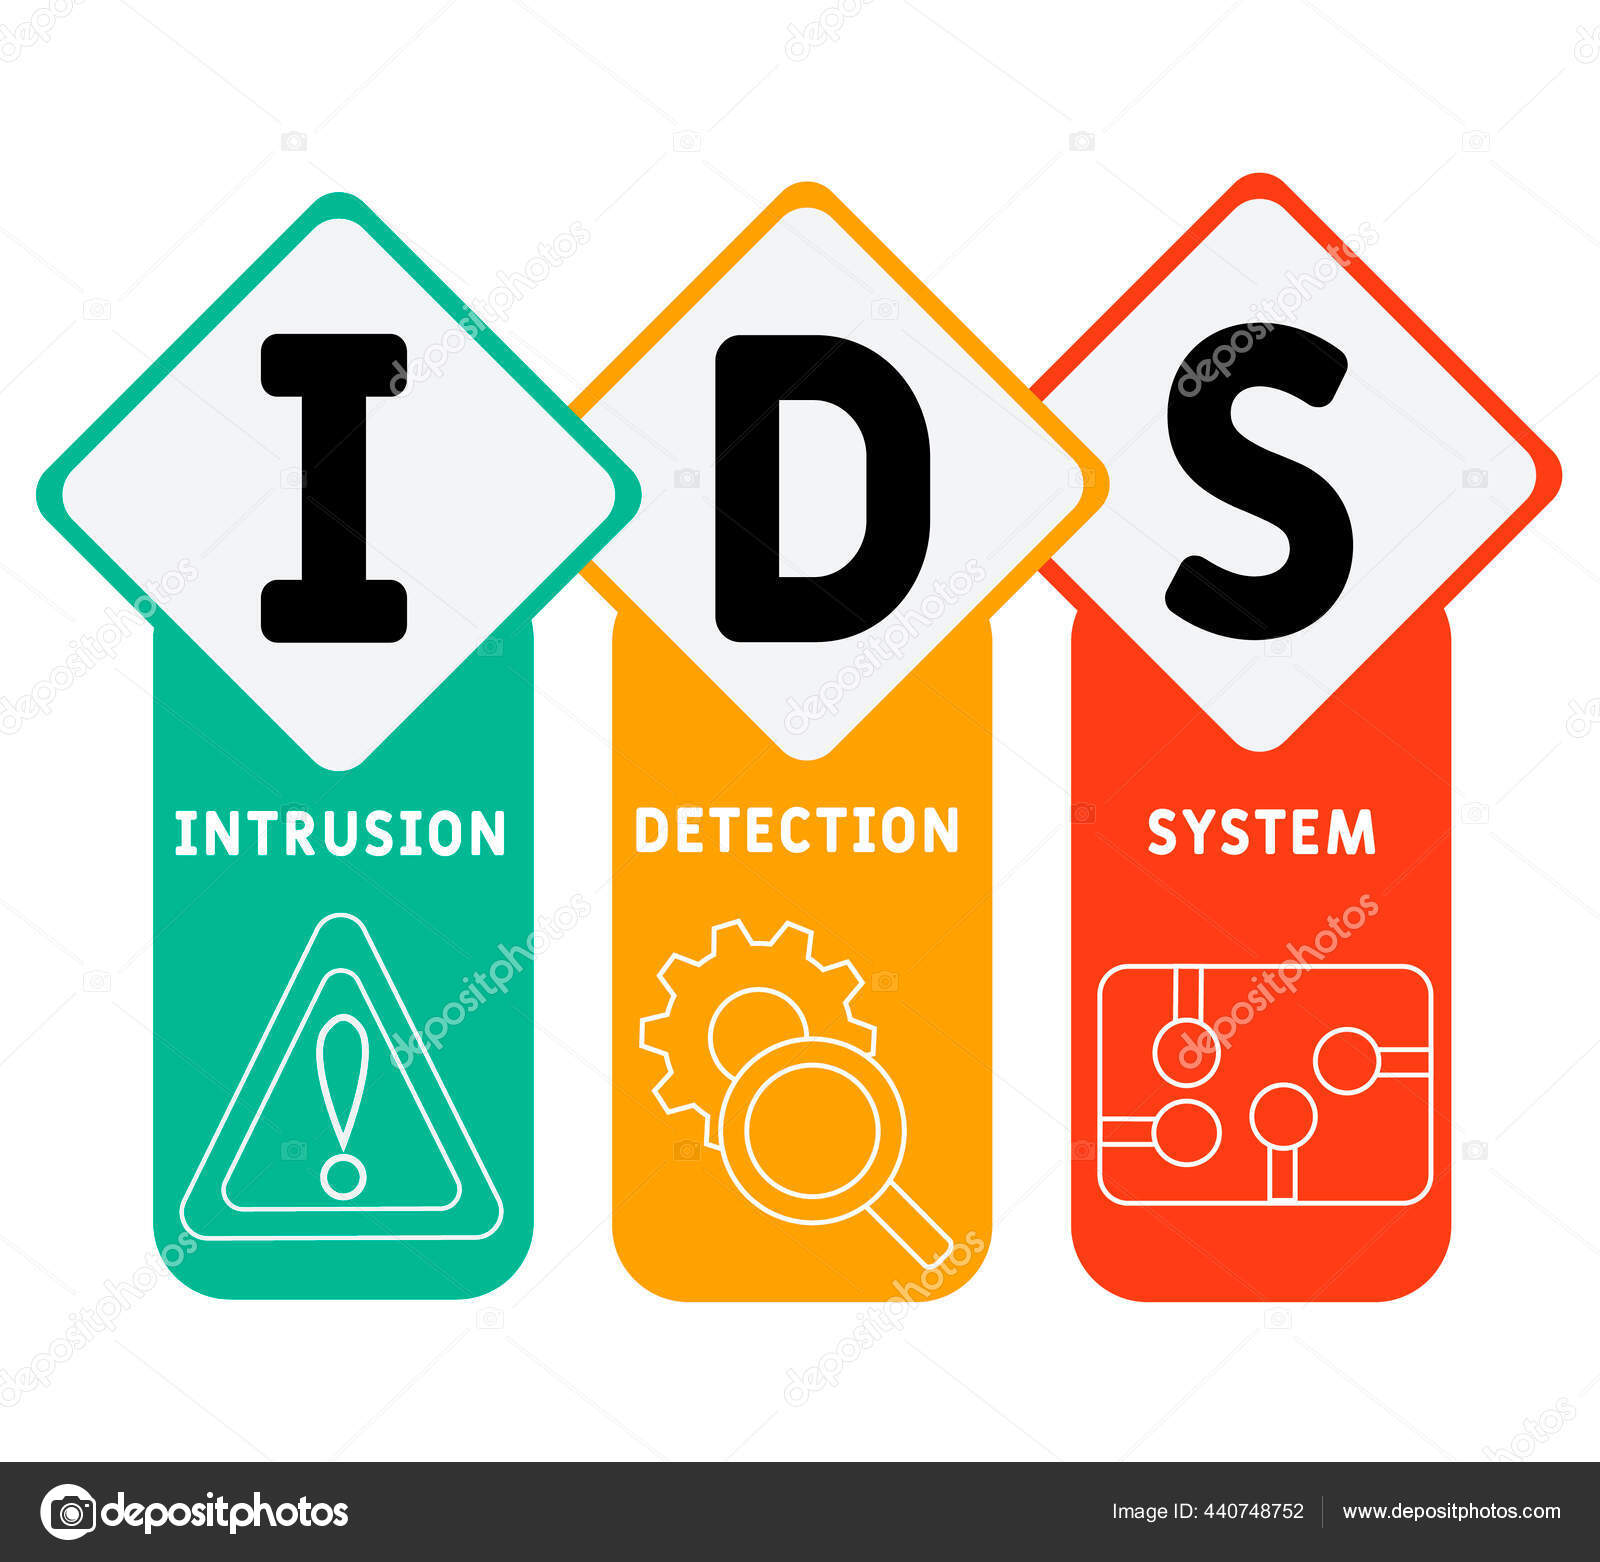 Ids Intrusion Detection System Acronym Business Concept Background ...